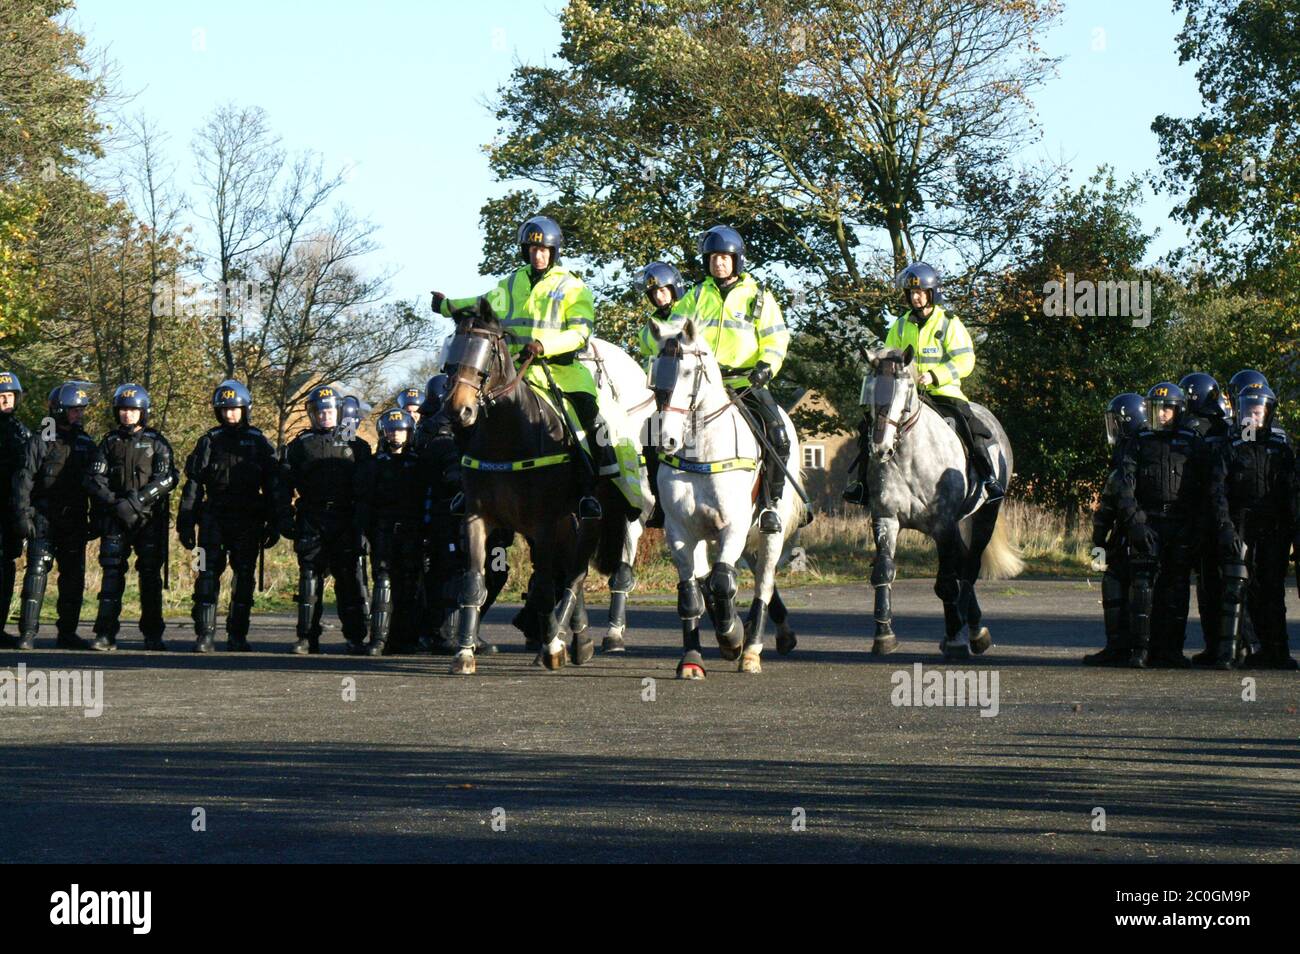 Civil disorder, Mounted police, Stock Photo